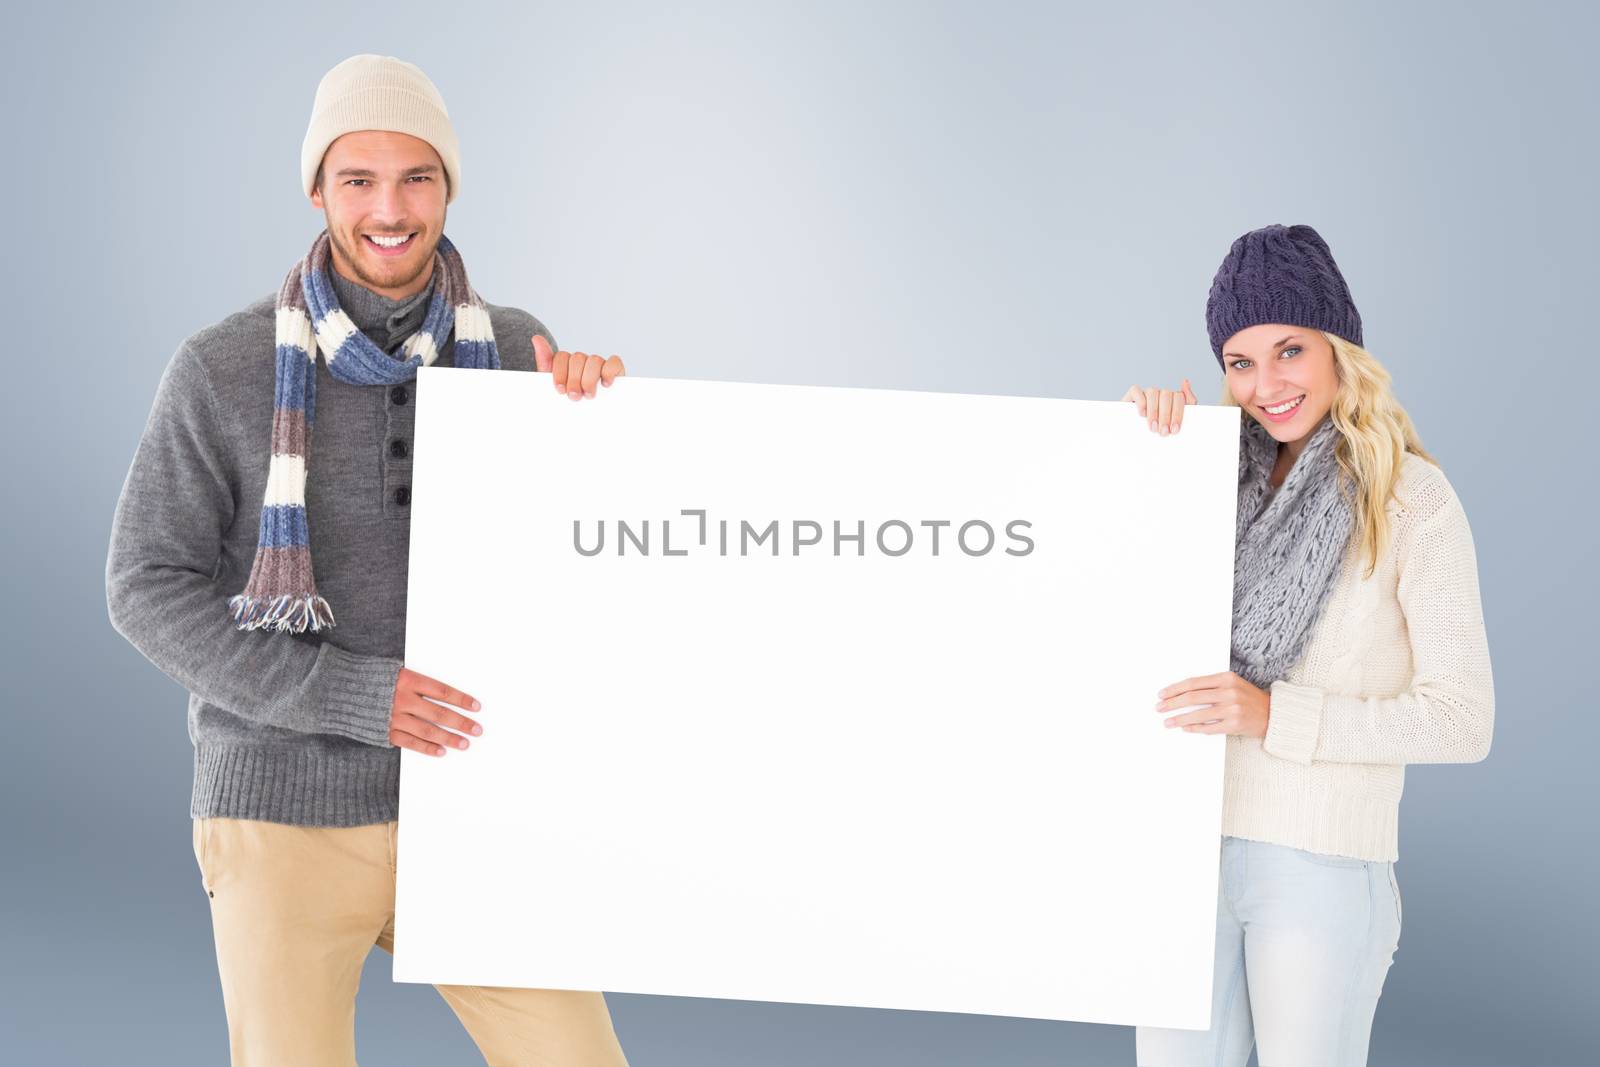 Attractive couple in winter fashion showing poster by Wavebreakmedia